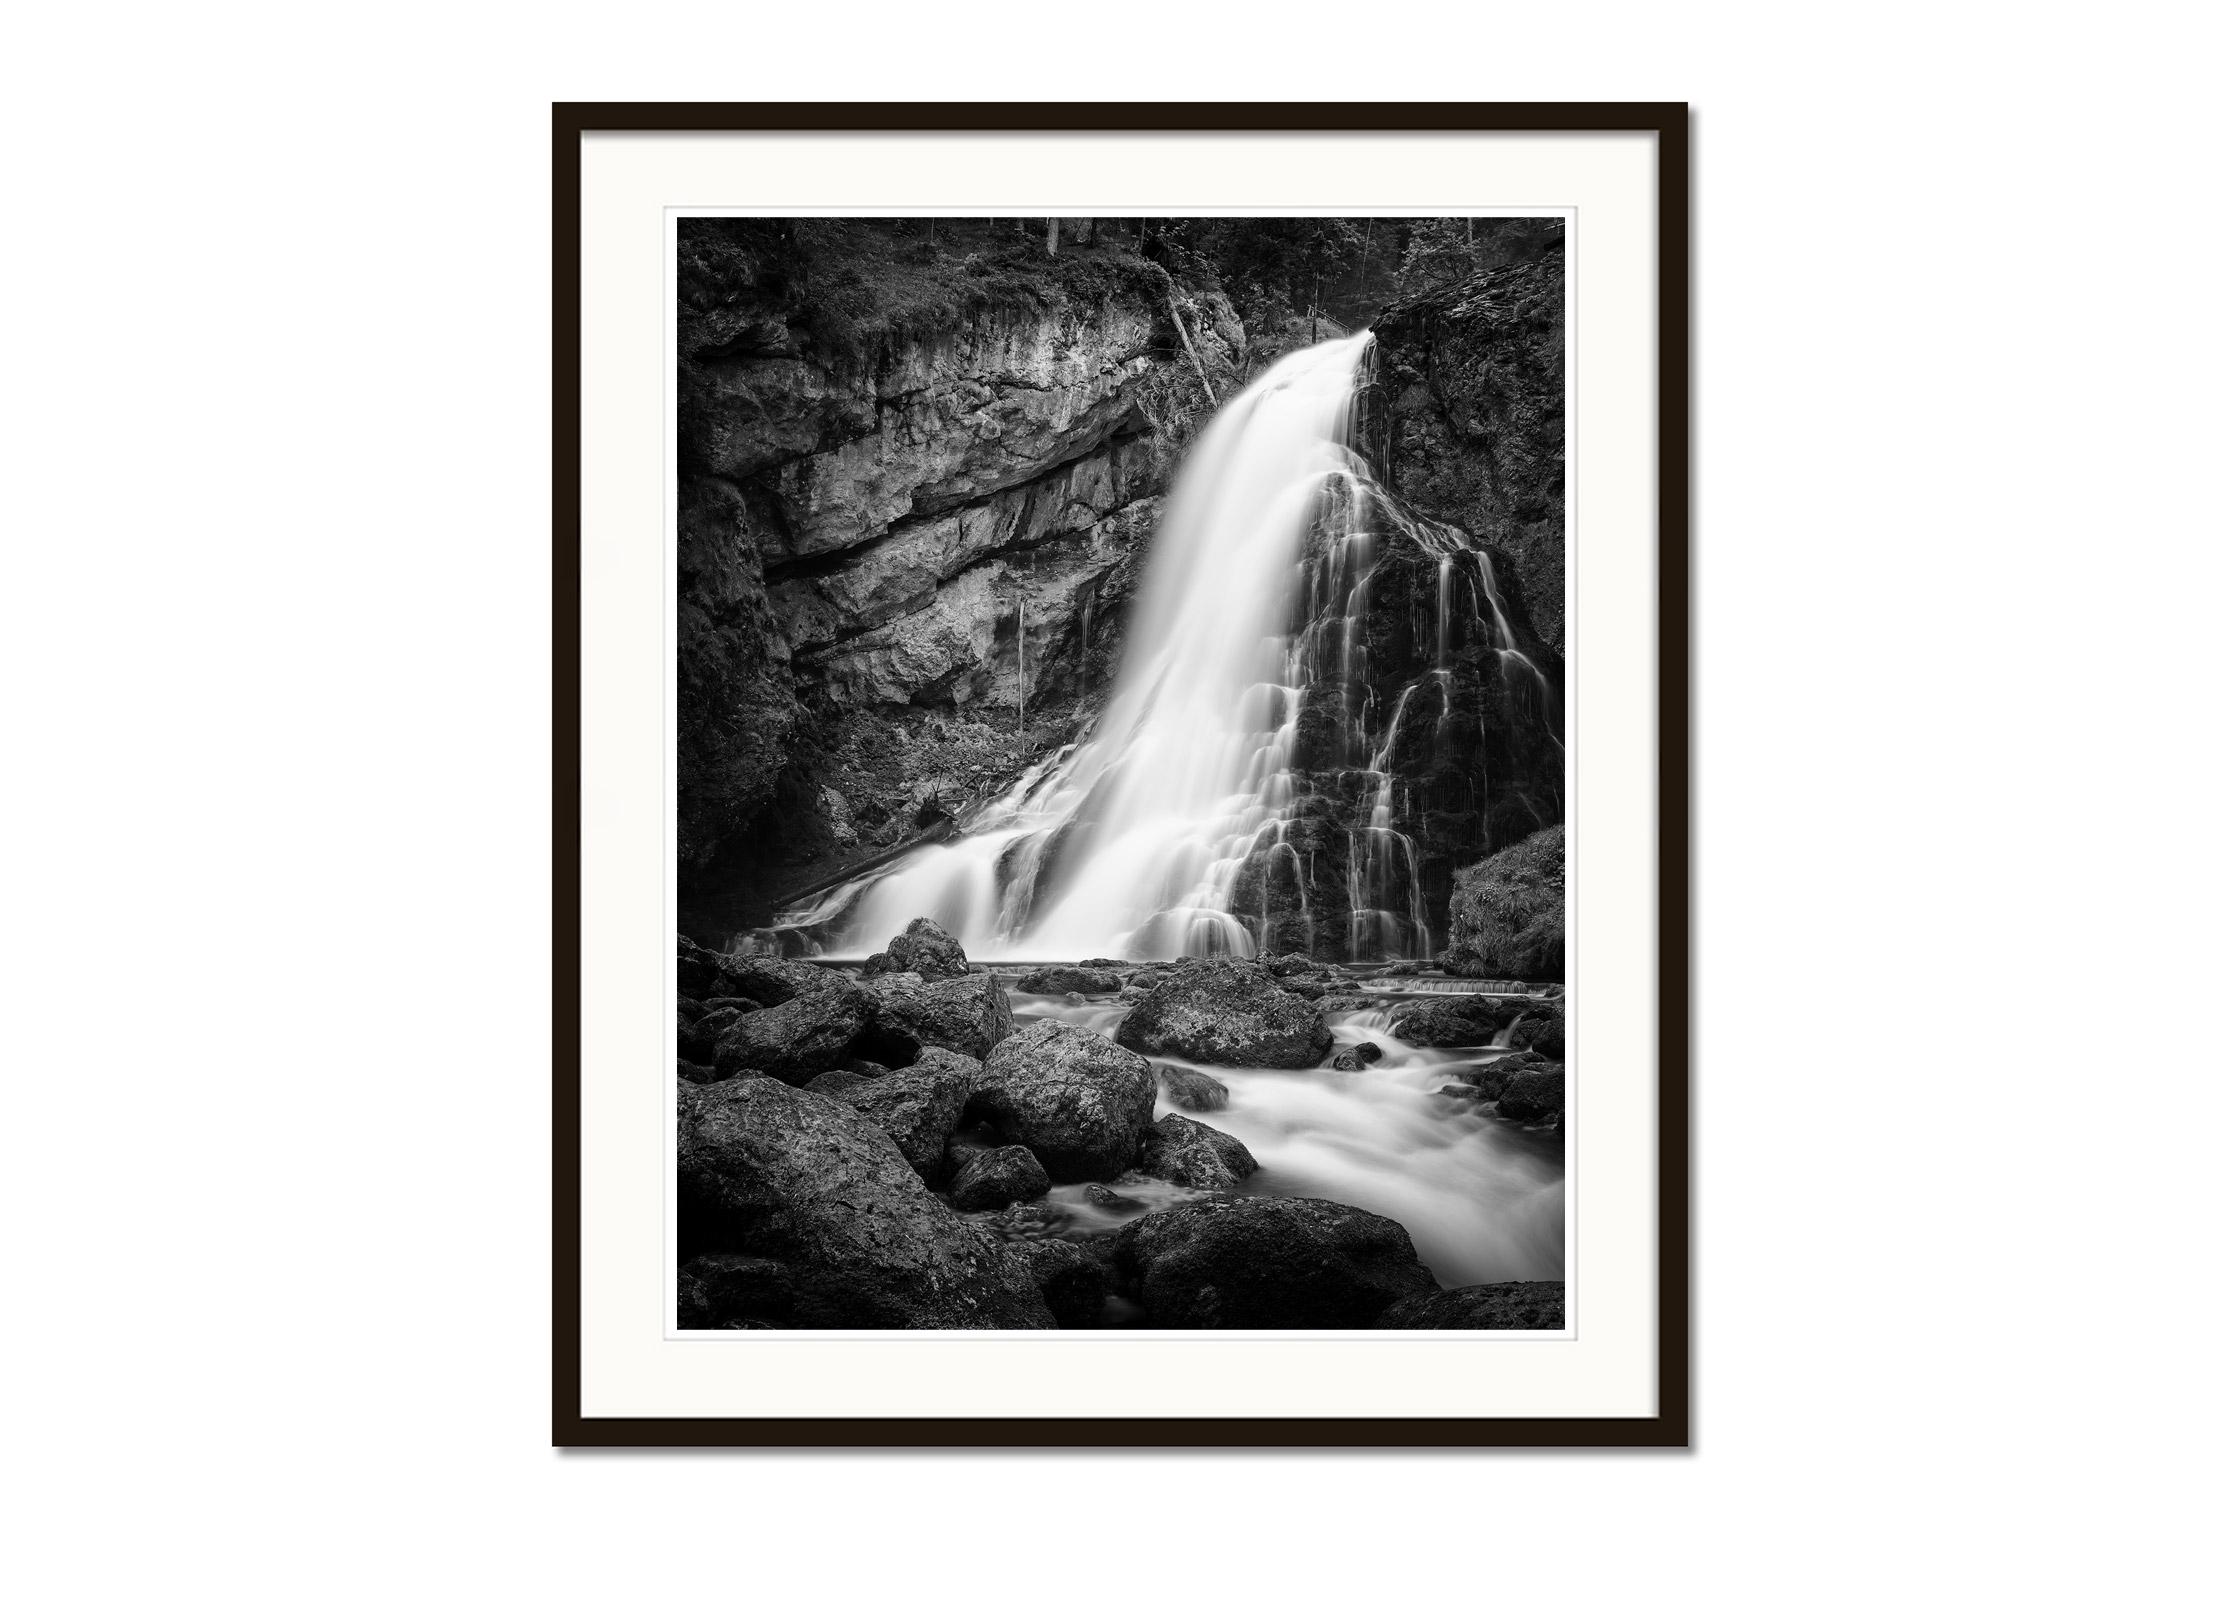 Golling Falls, Waterfall, Austria, black & white waterscape fine art photography - Contemporary Photograph by Gerald Berghammer